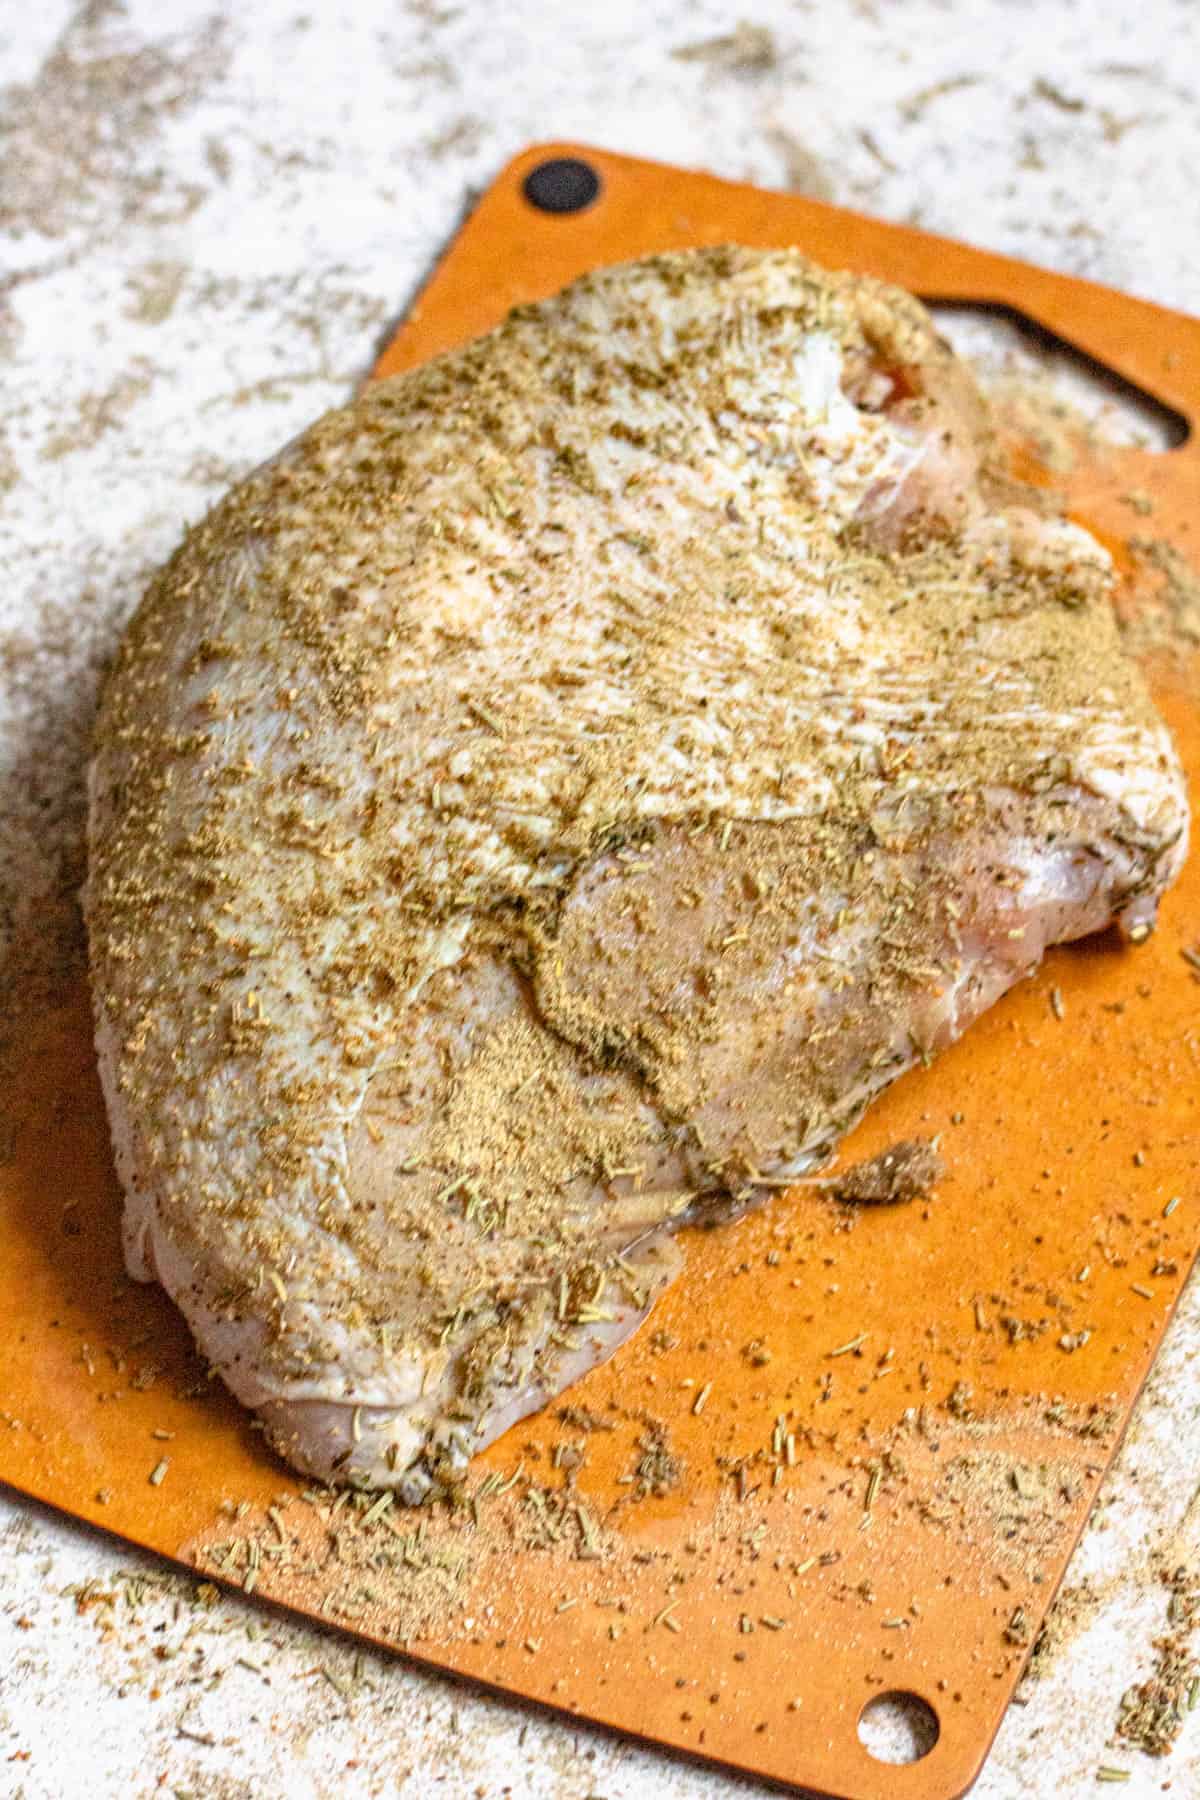 Turkey rubbed in a spice blend